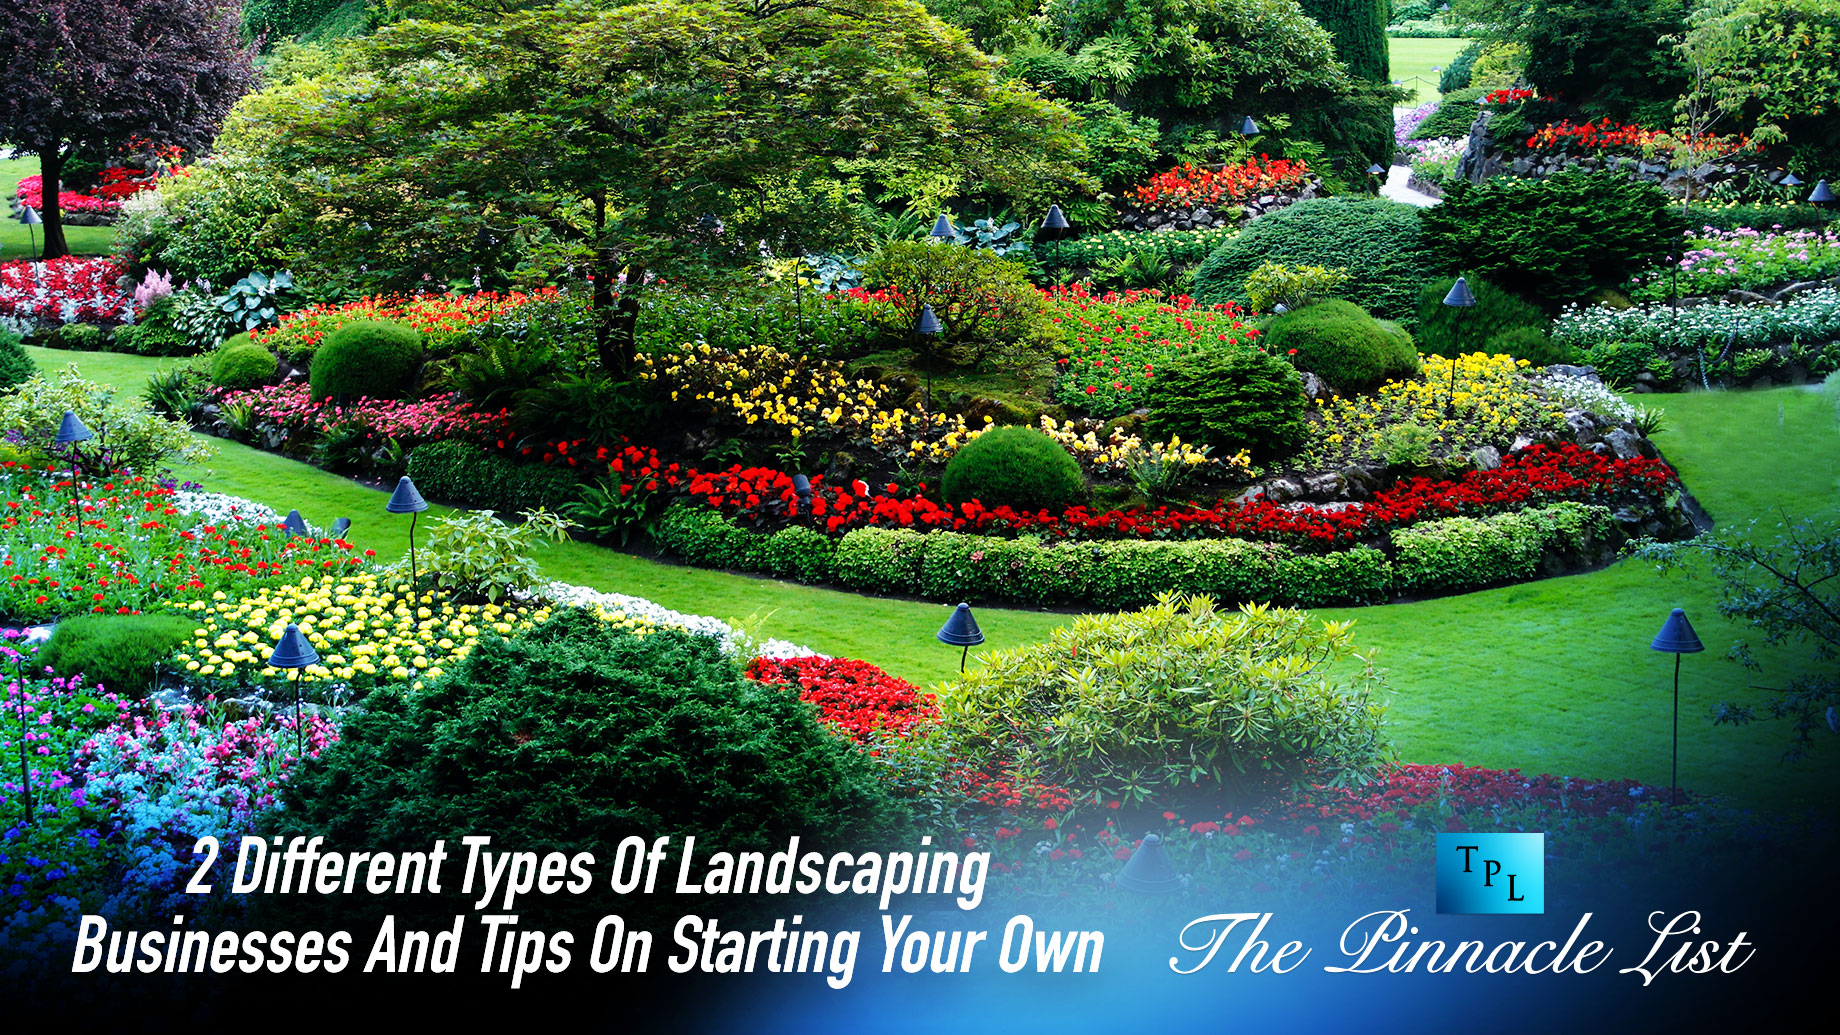 2 Different Types Of Landscaping Businesses And Tips On Starting Your Own